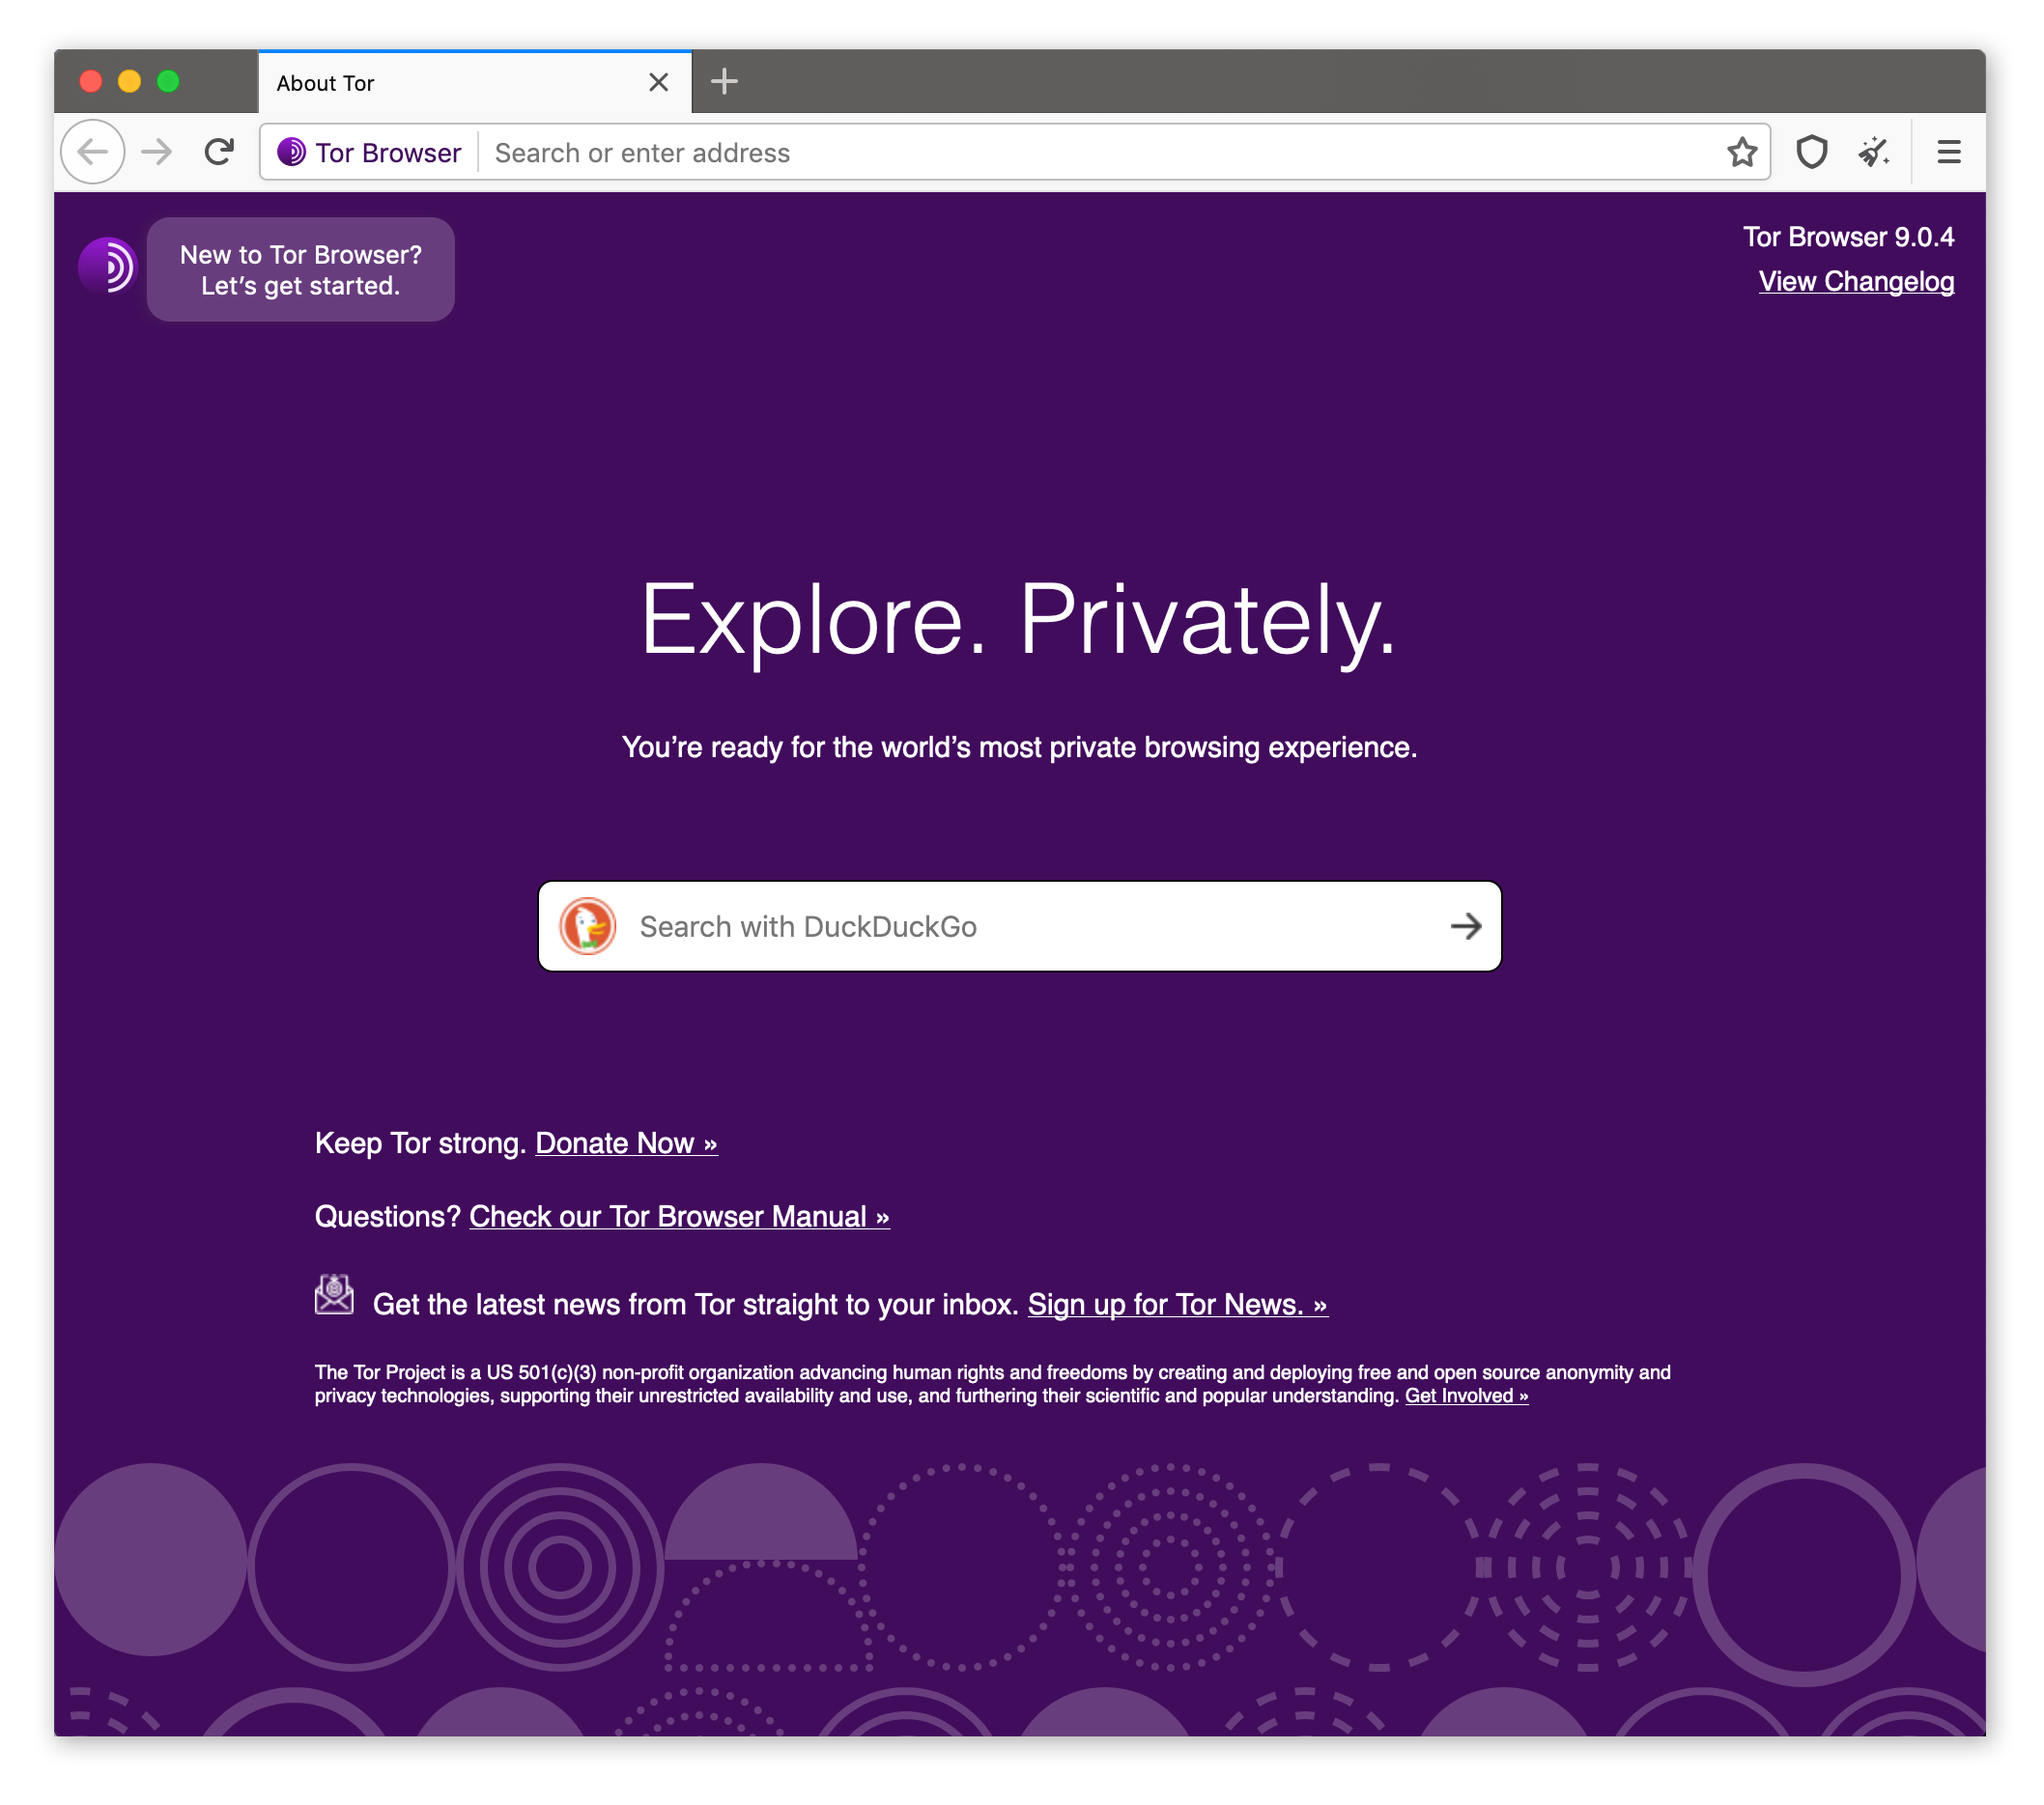 Here is the Tor browser, which opens to the Duck Duck Go search engine by default.